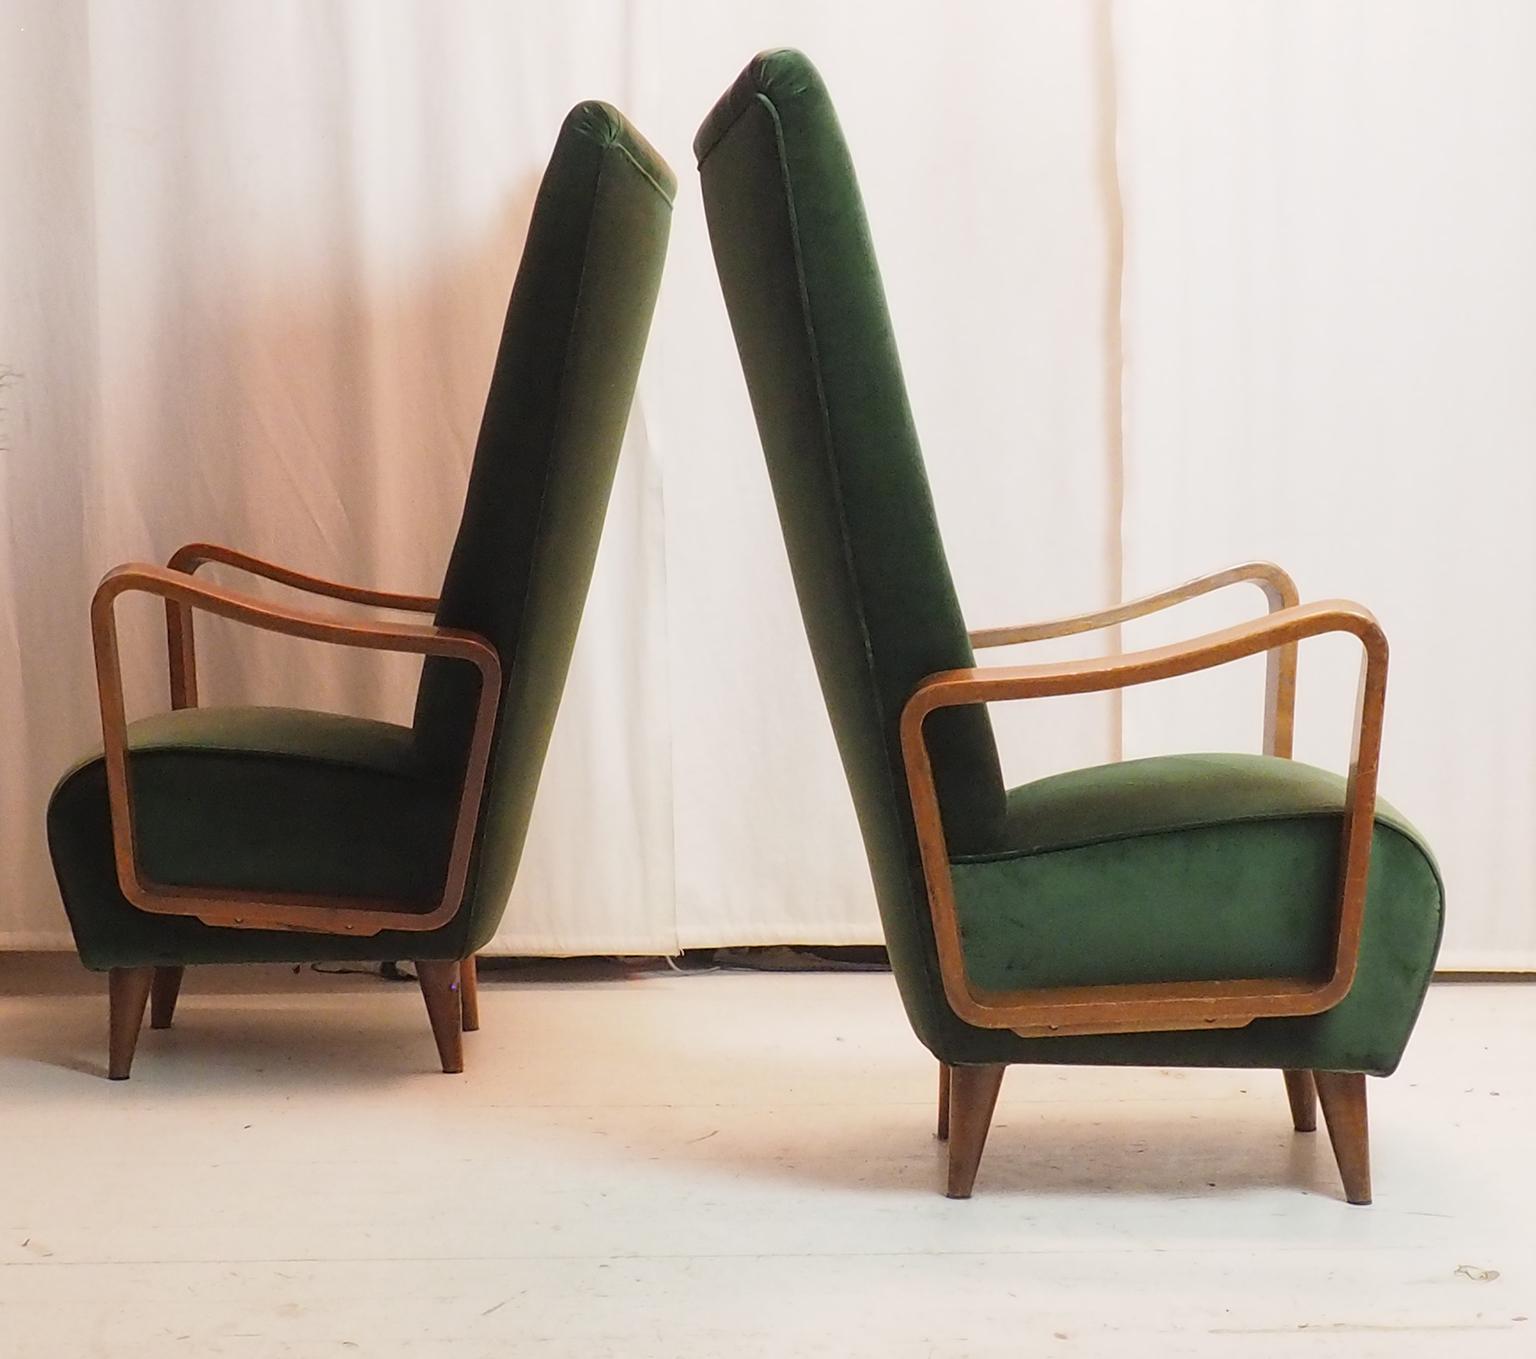 Midcentury High Back Italian Green Armchairs by Pietro Lingeri, Italy, 1950s For Sale 8